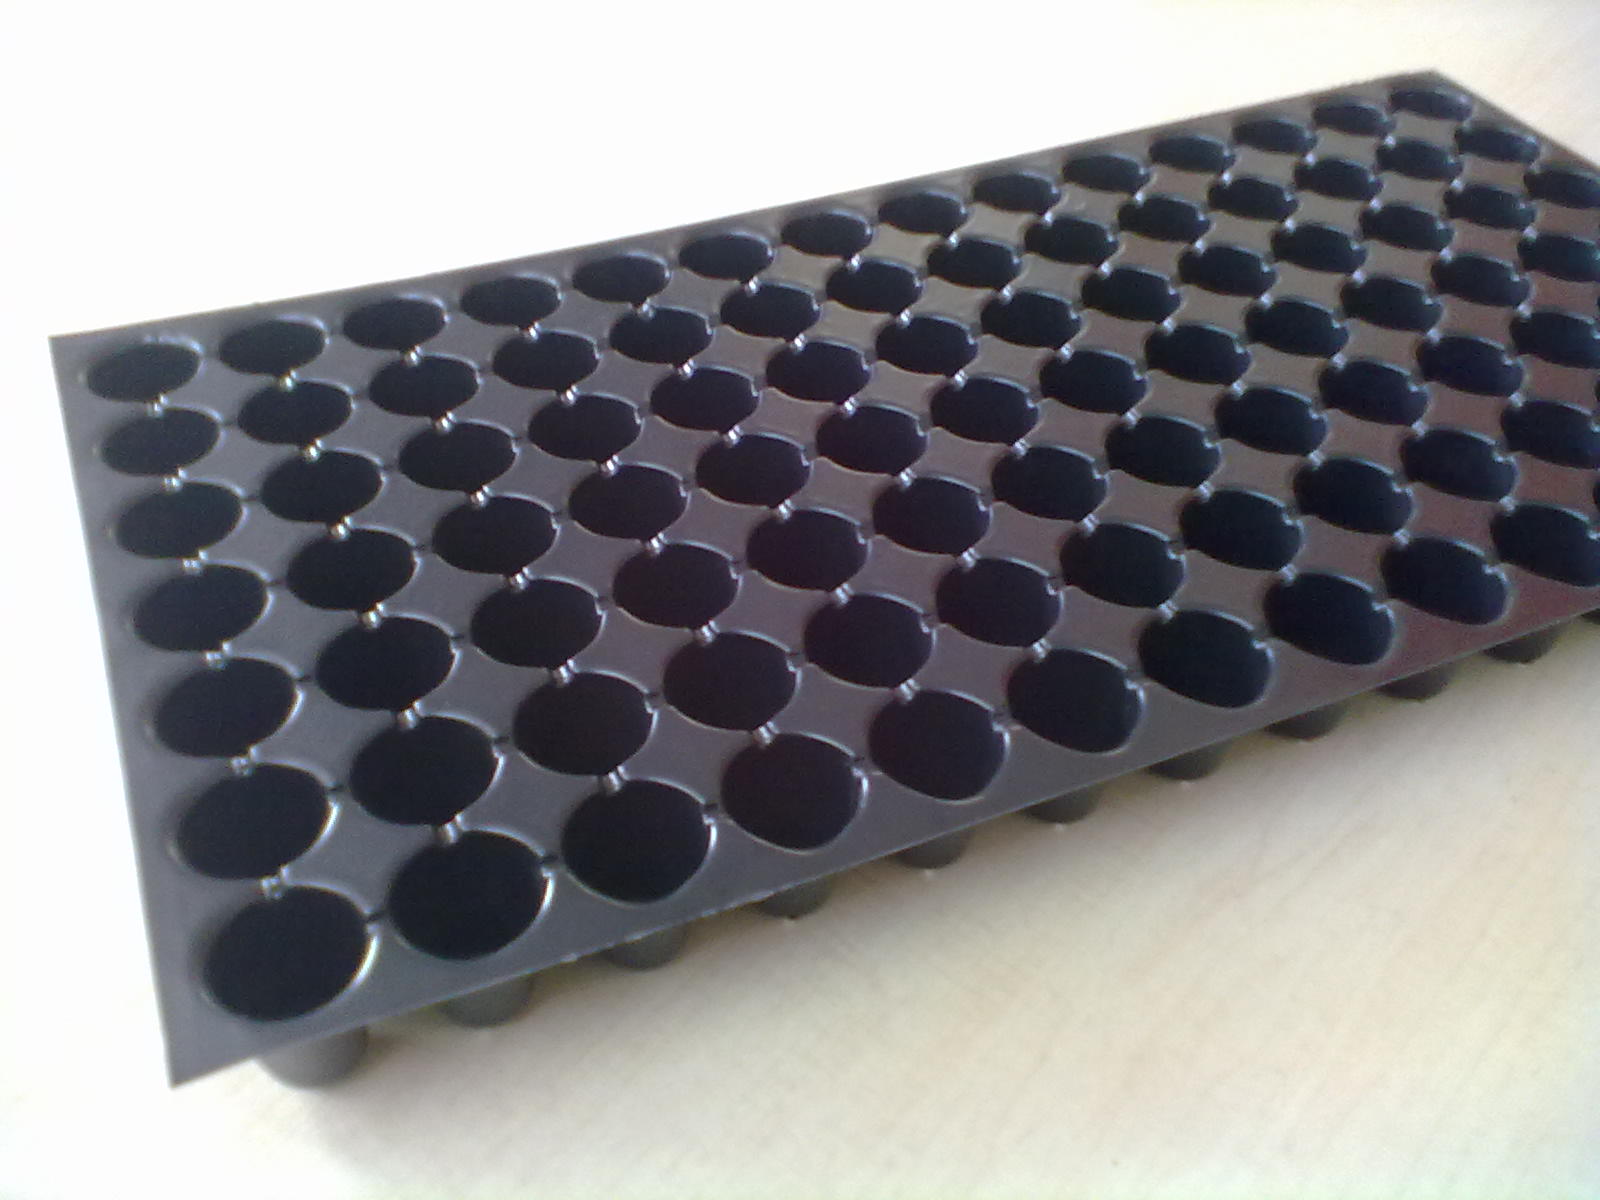 98 Cavity seedling Tray manufacturer, supplier